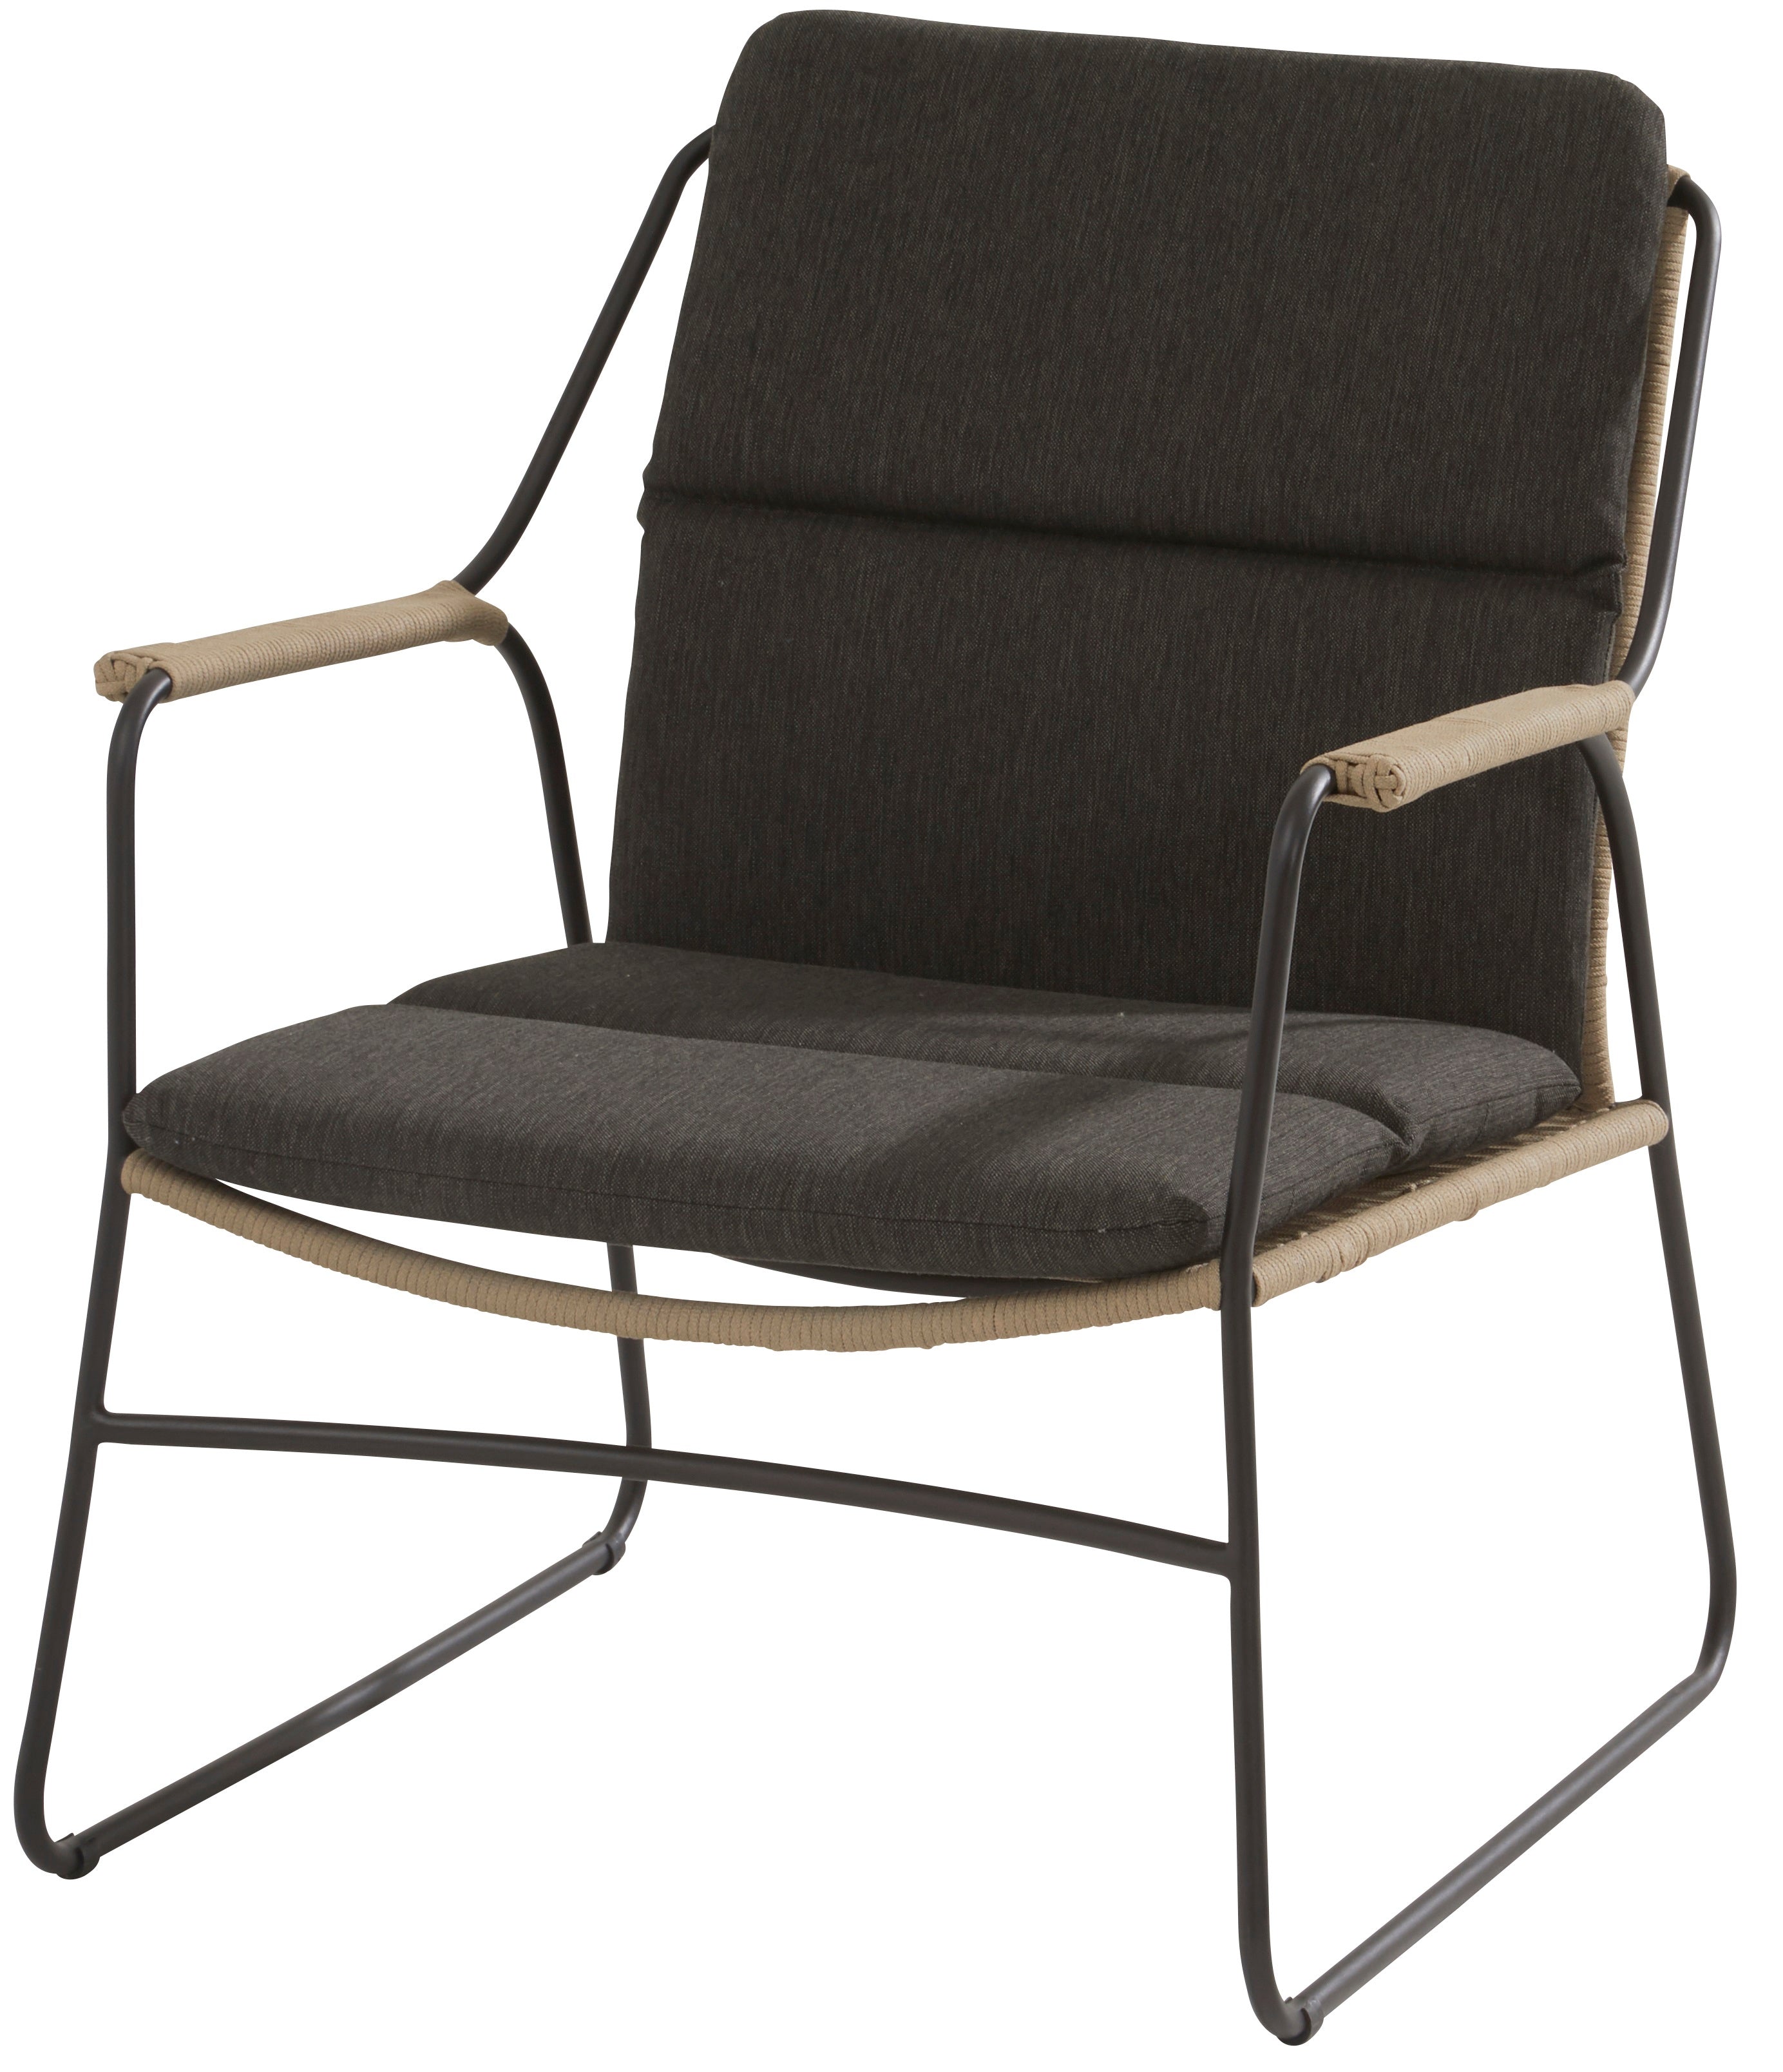 4 Seasons Outdoor Scandic Living Chair With 2 Cushions